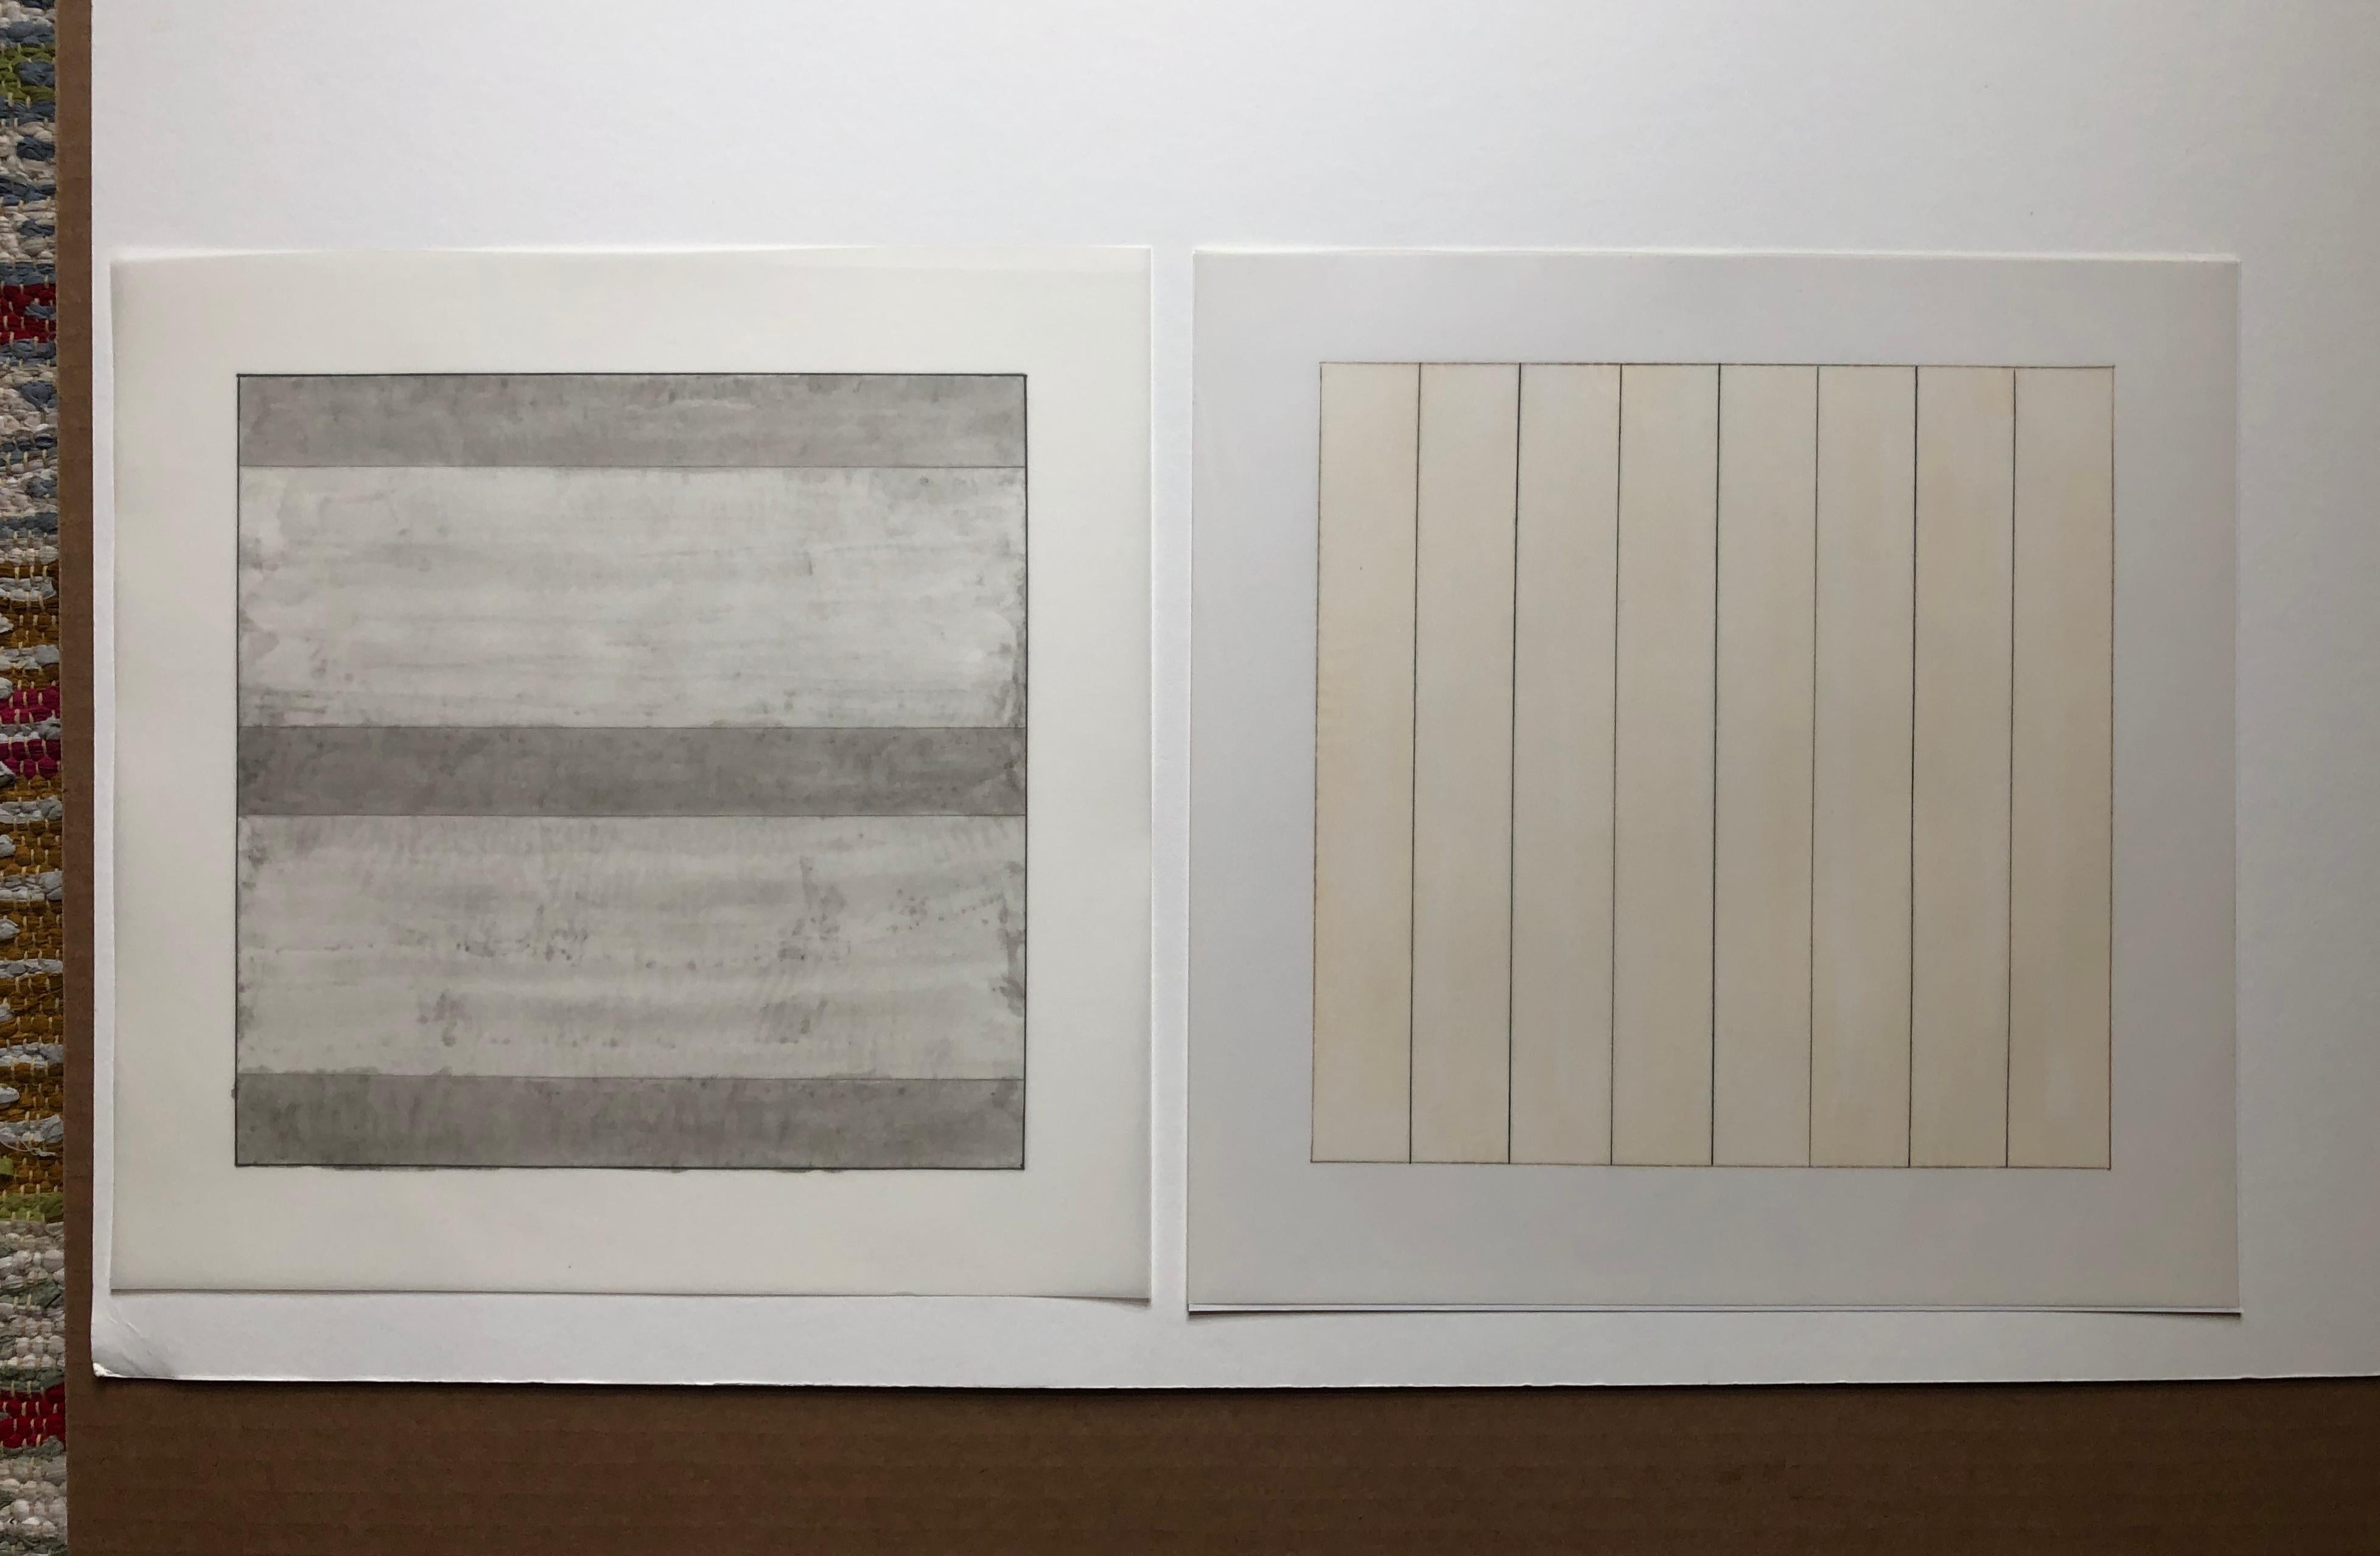 AGNES MARTIN
Paintings and Drawings: Stedelijk Museum portfolio, 1990-1991

The complete set of ten lithographs, on vellum
From the edition of 2,500
Printed by Lecturis, Eindhoven
Published by Nemela & Lenzen GmbH, Monchengladback
and Stedelijk